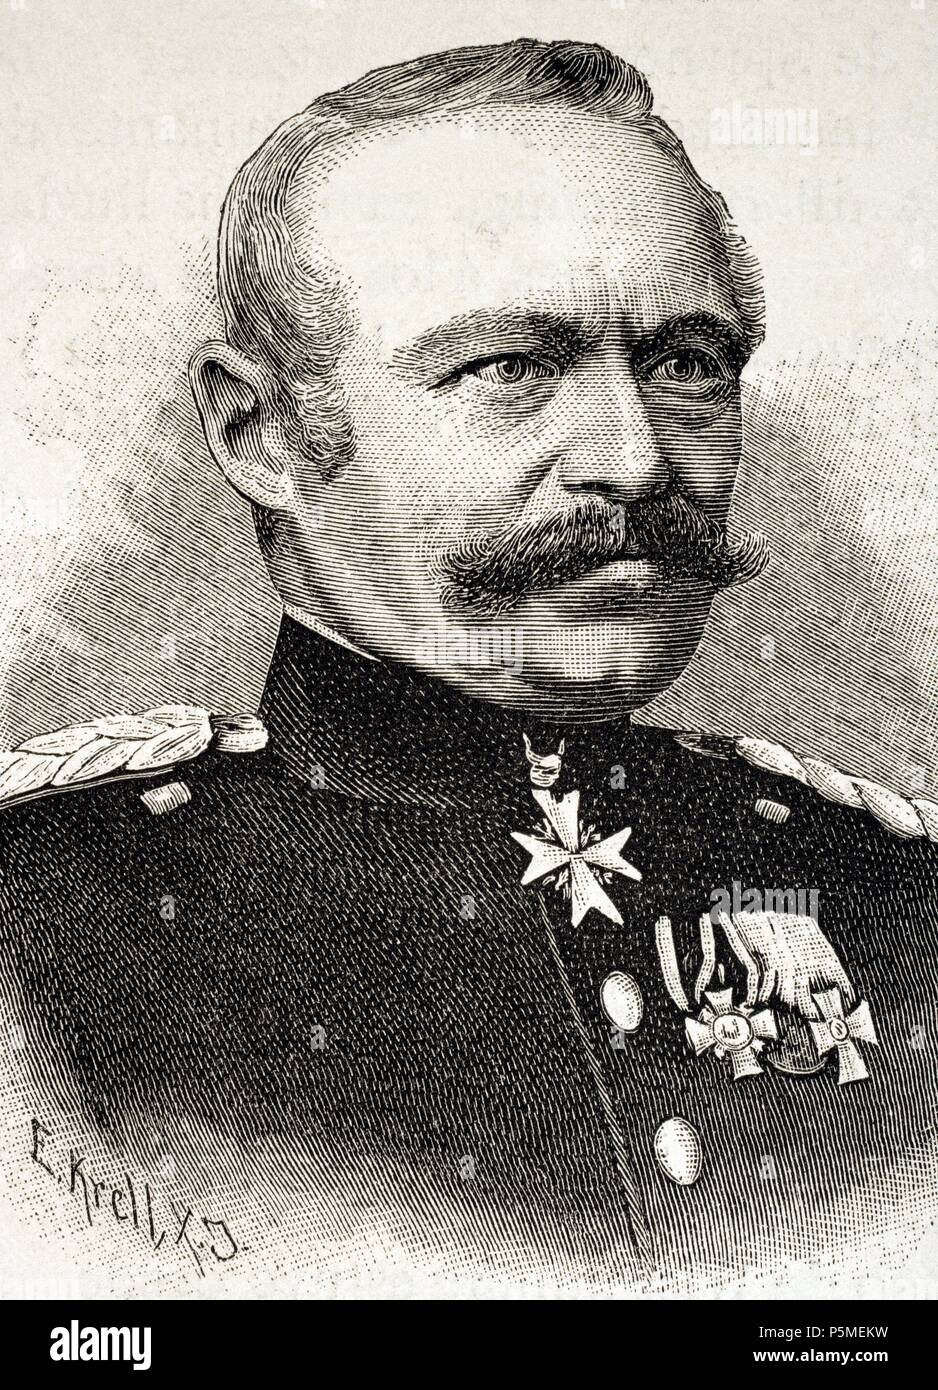 Julius von Bose (1809-1894). Prussian general. Engraving in The Universal History, 1885. Stock Photo